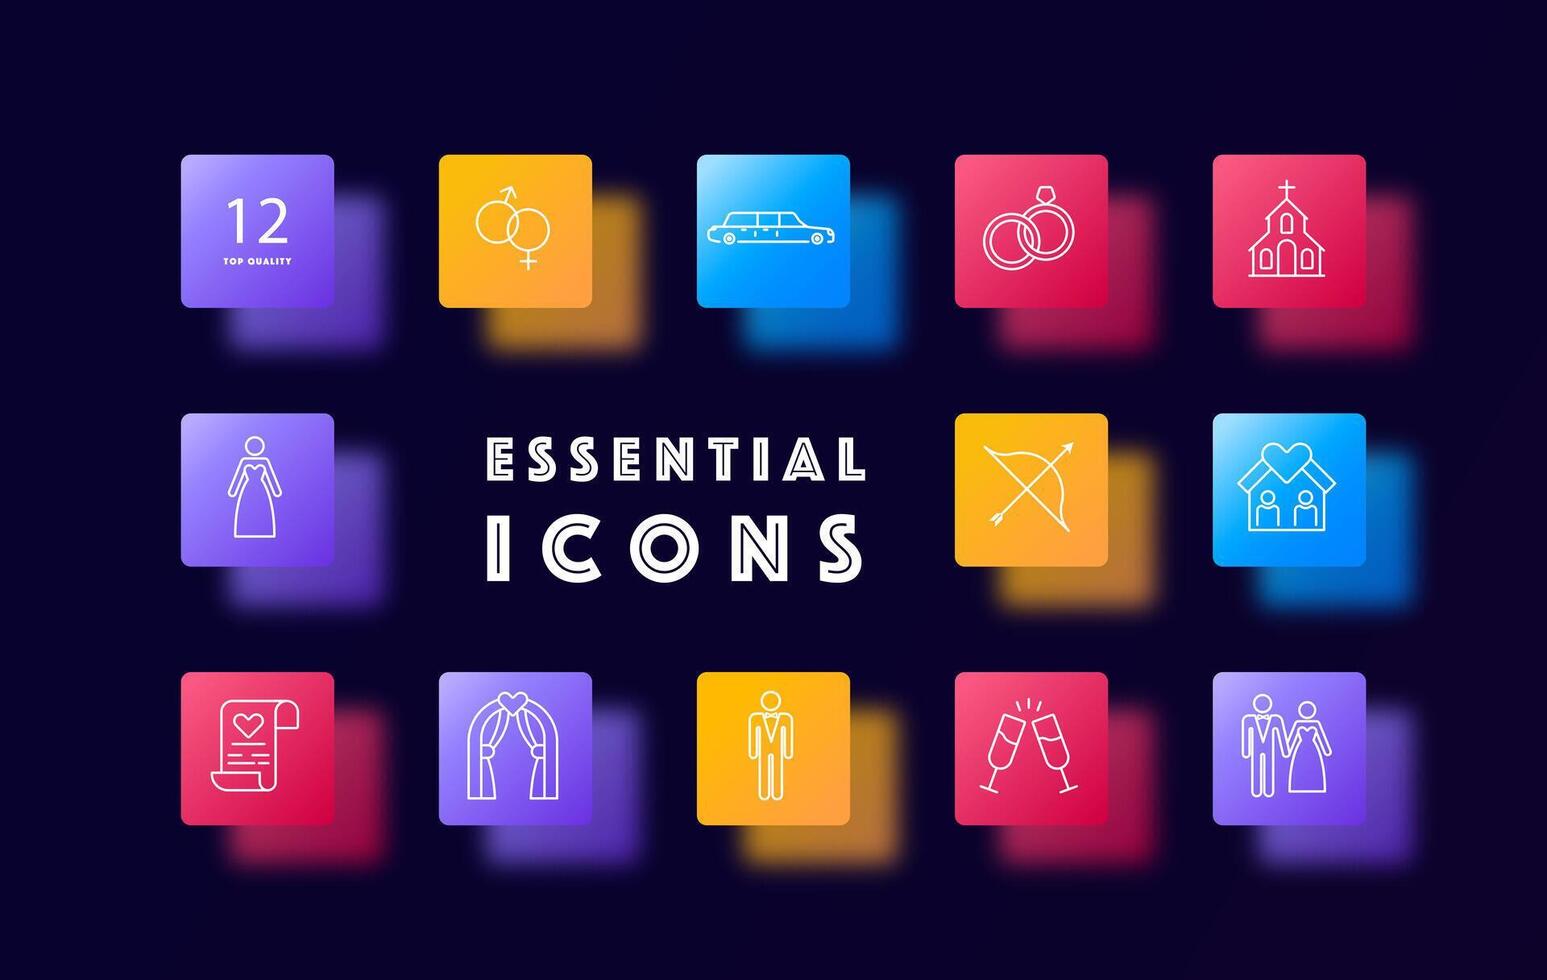 Wedding icon set. Document, wine, sex, glasses, church, heart, wife, wedding dress and suit, man, groom, house, limousine, bow, marriage certificate, altar. Marriage concept. Glassmorphism style. vector